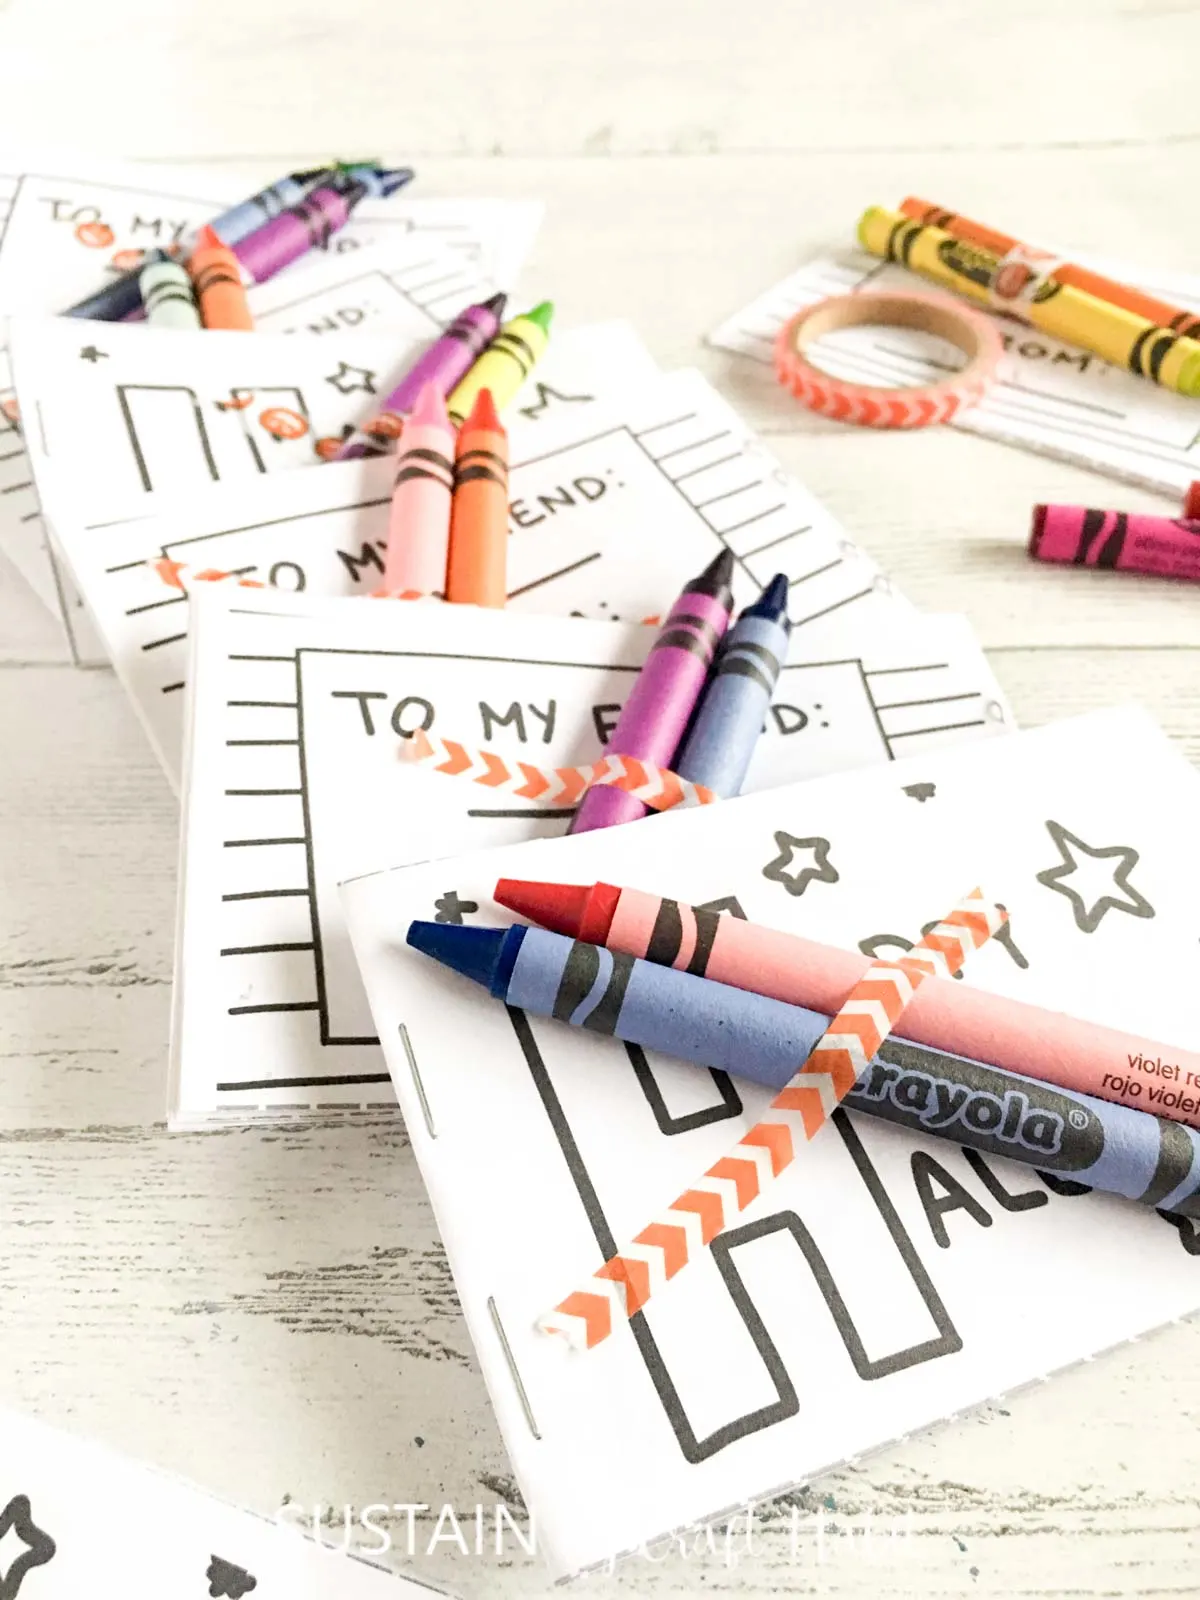 Printable Halloween coloring books with colorful crayon attached with washi tape.